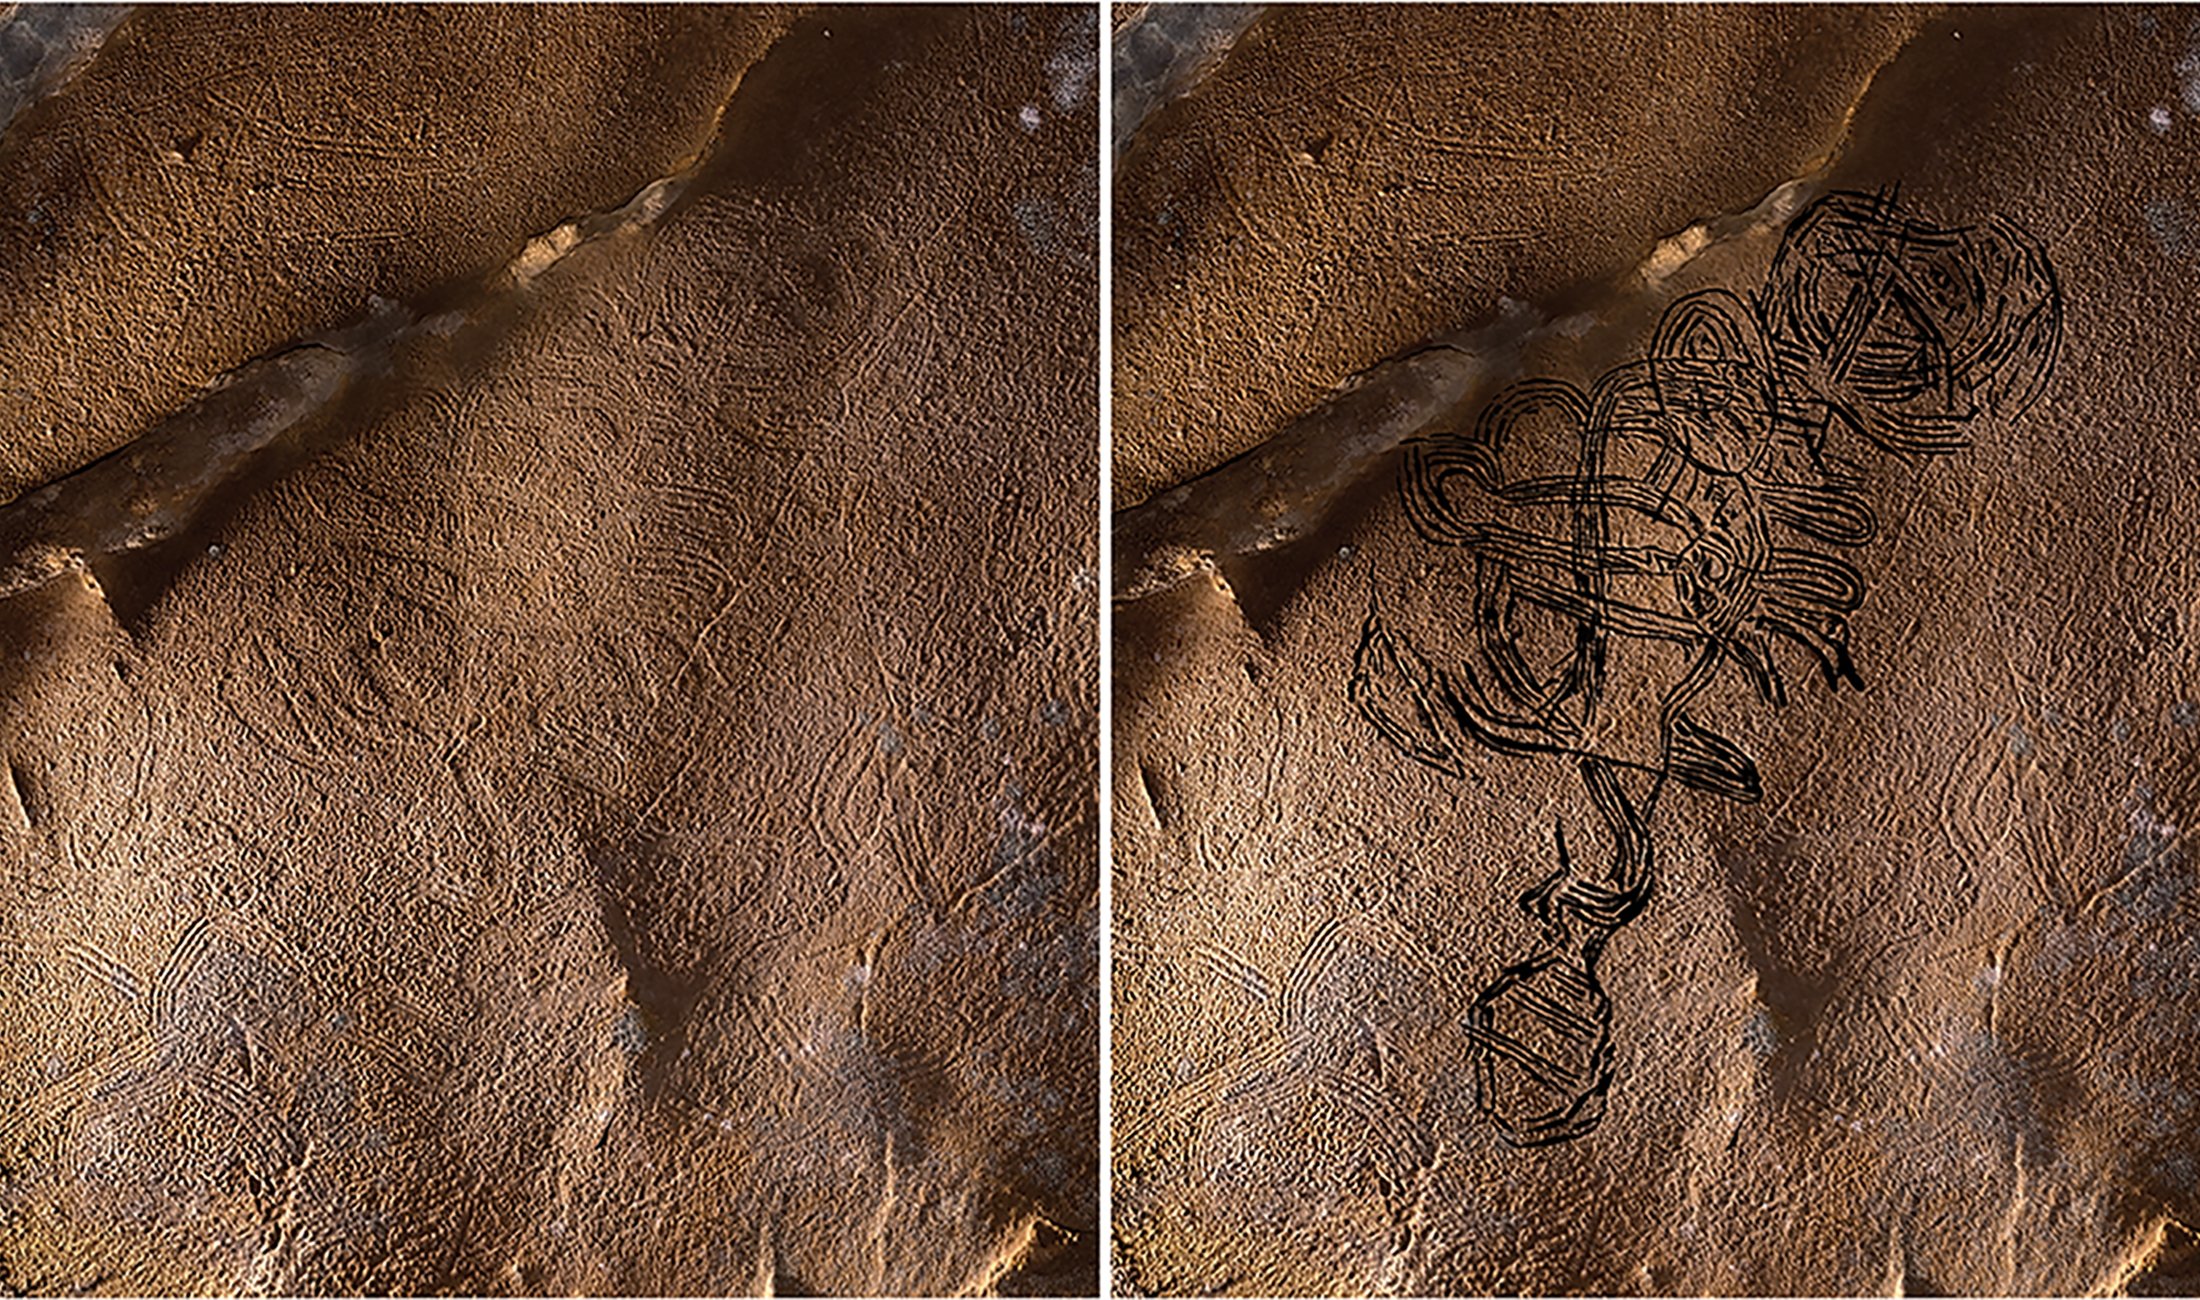 An enigmatic figure of swirling lines, with a round head at one end and a possible rattlesnake tail at the other, from an unnamed cave in Alabama, U.S., in combination with an artist's illustration. (Photo courtesy of Antiquity Journal)